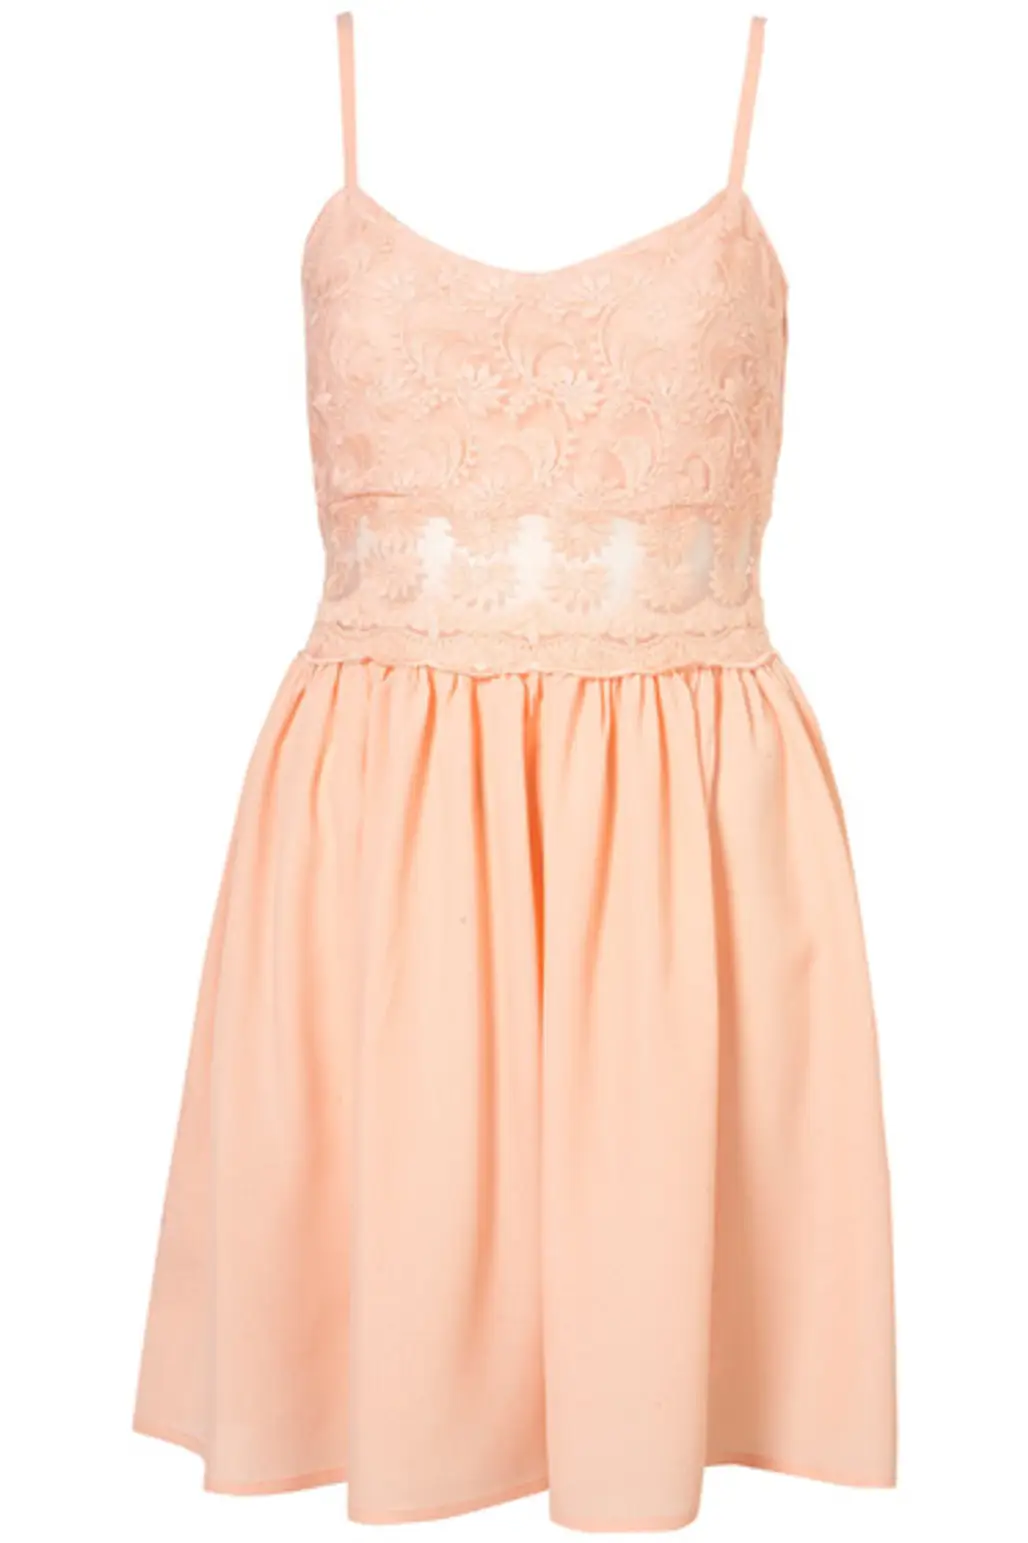 Topshop Lace Strappy Dress